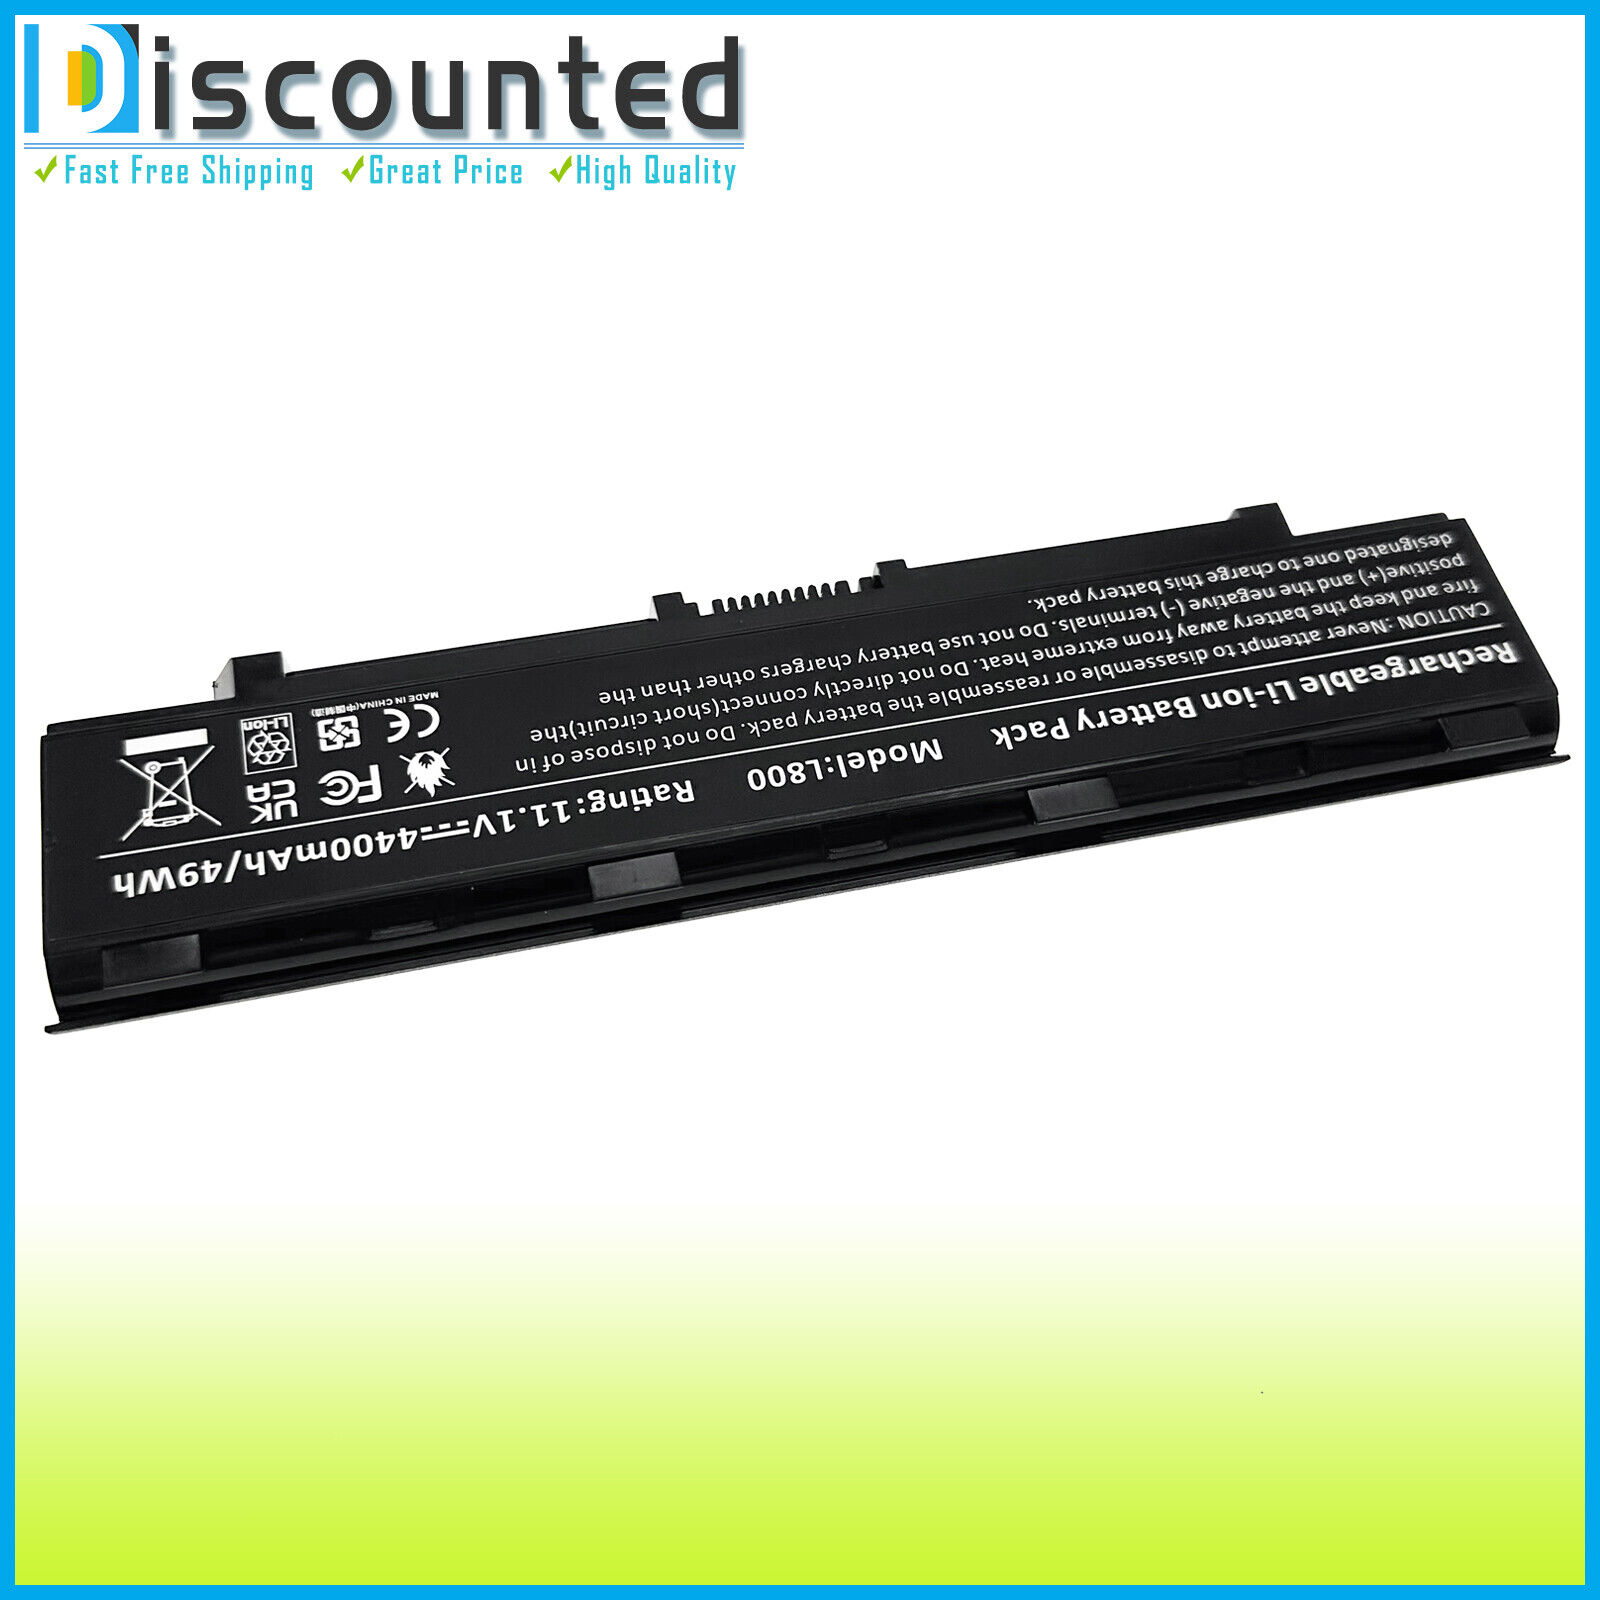 Laptop New Battery for Toshiba Satellite S855-S5251,S855-S5254, S855-S5260